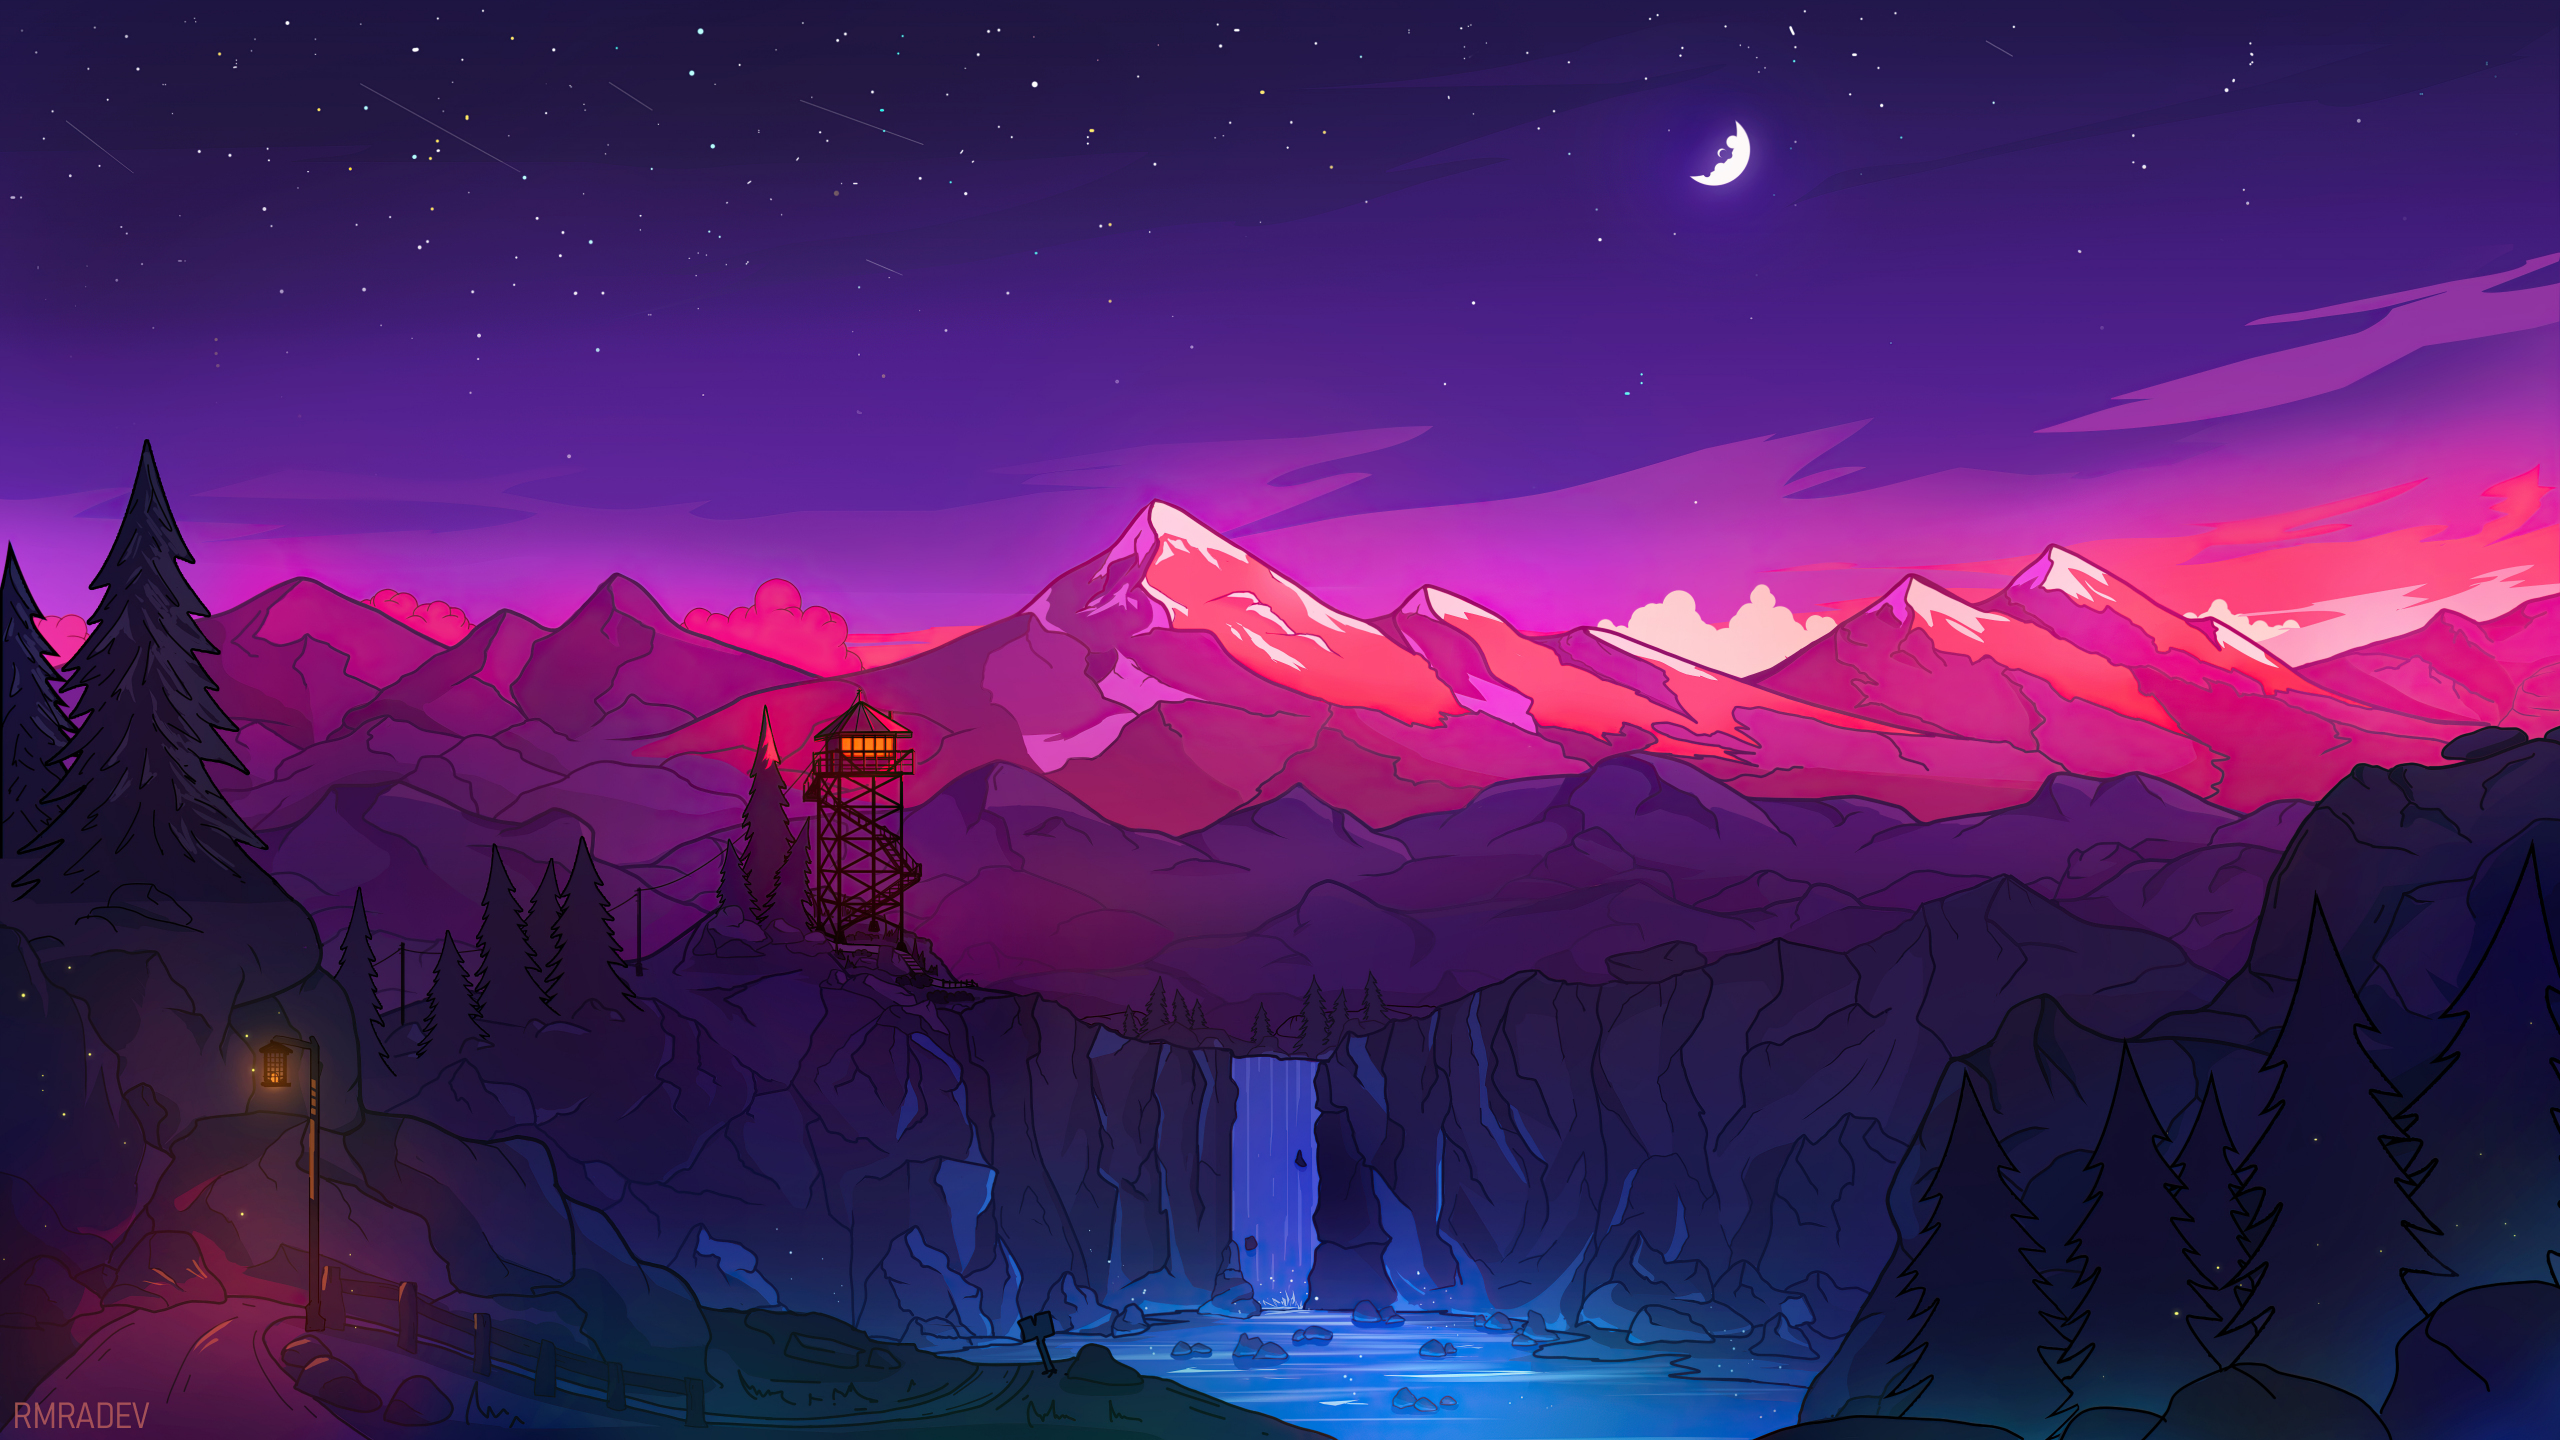 Download wallpaper 2560x1440 colorful mountains, night, waterfall, minimal,  dual wide 16:9 2560x1440 hd background, 27319